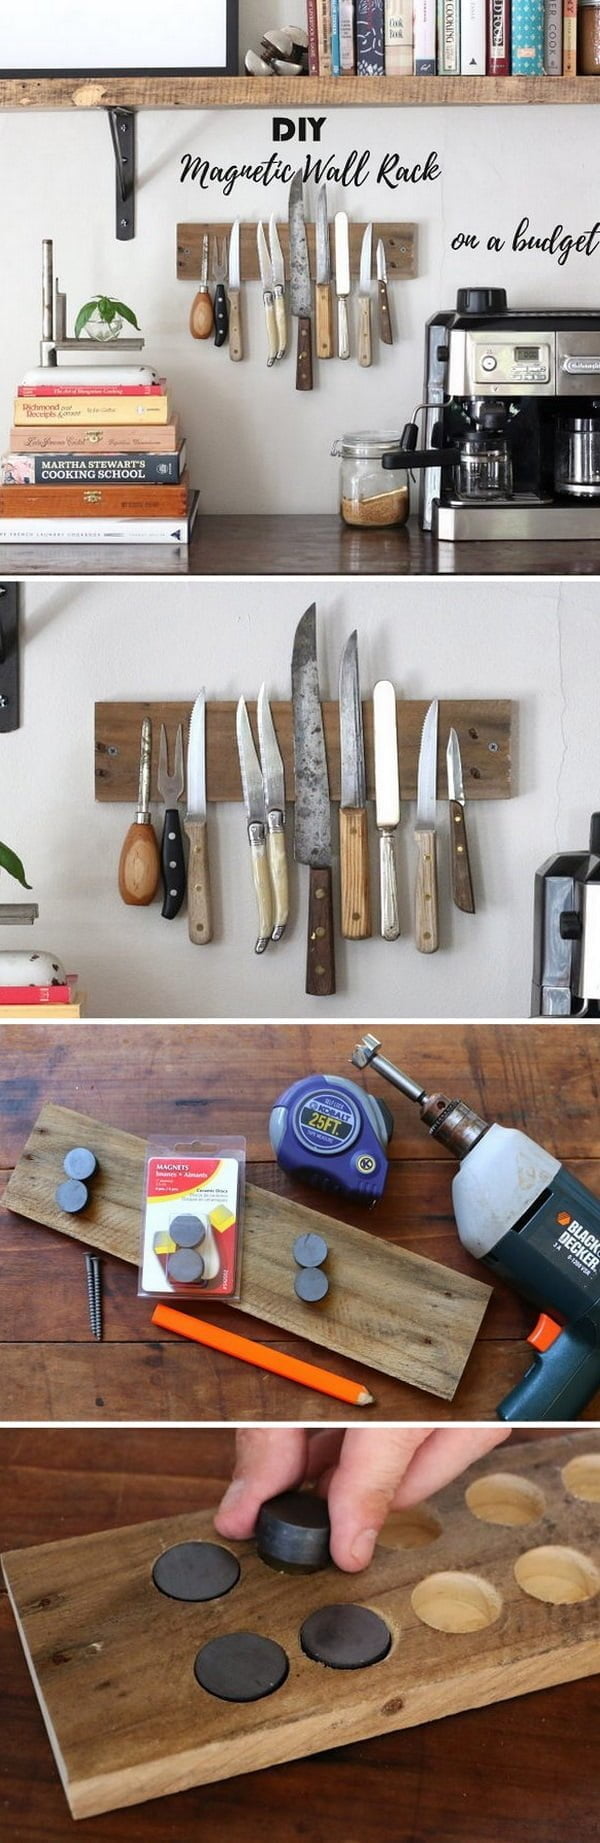 How to make a  magnetic wall rack for   on a   